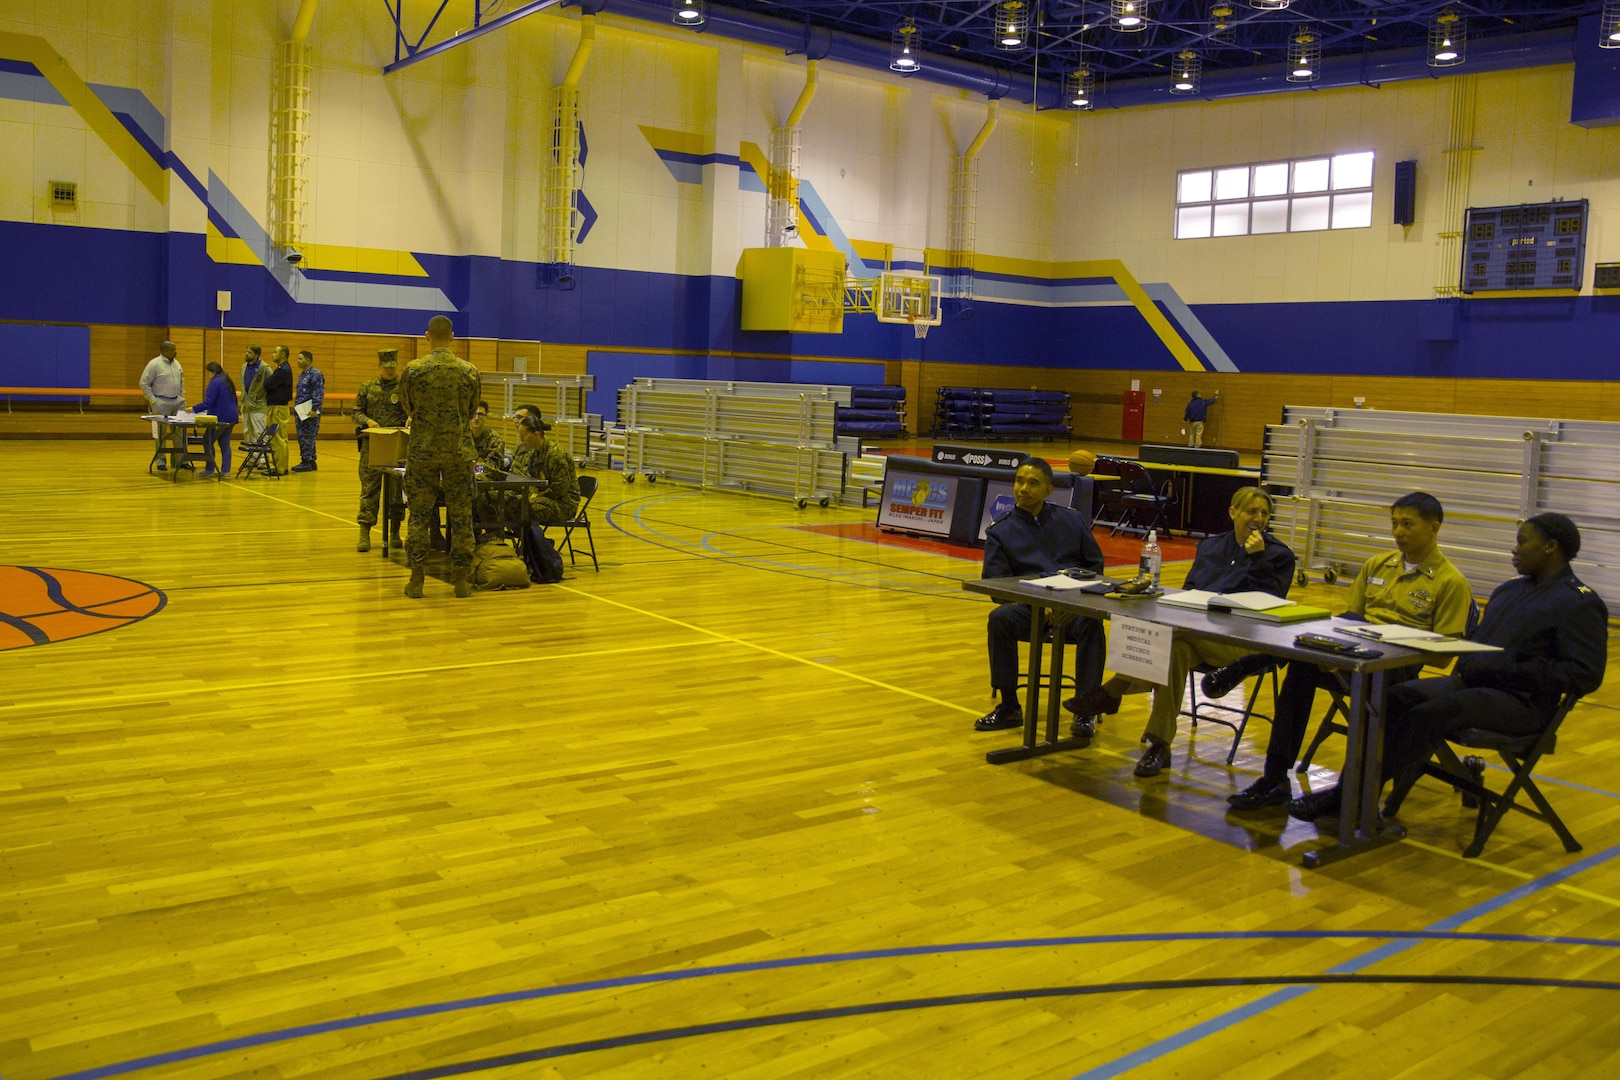 Station residents provide required information to the Navy and Marine Corps Relief Society, and American Red Cross during a noncombatant evacuation processing center exercise in the IronWorks Gym at Marine Corps Air Station Iwakuni, Japan, Dec. 11, 2015. This exercise practices evacuating endangered personnel in a host foreign nation to a safe location. An evacuation can take place for a variety of reasons such as natural disasters, industrial accidents and military threats.